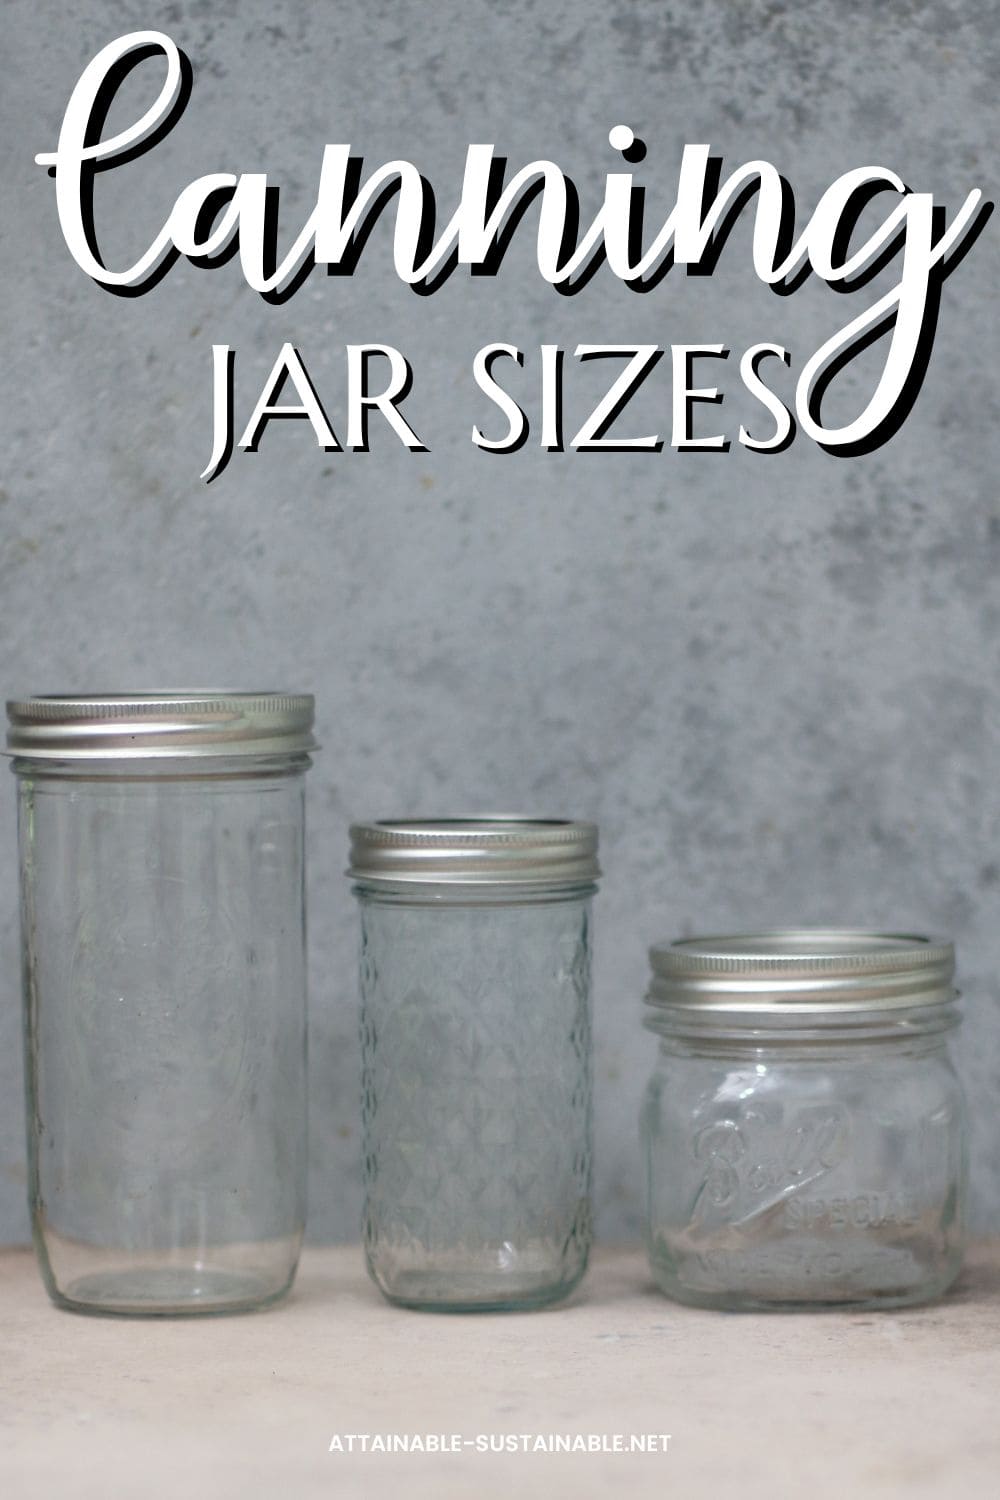 How to Choose Mason Jar Sizes for Canning